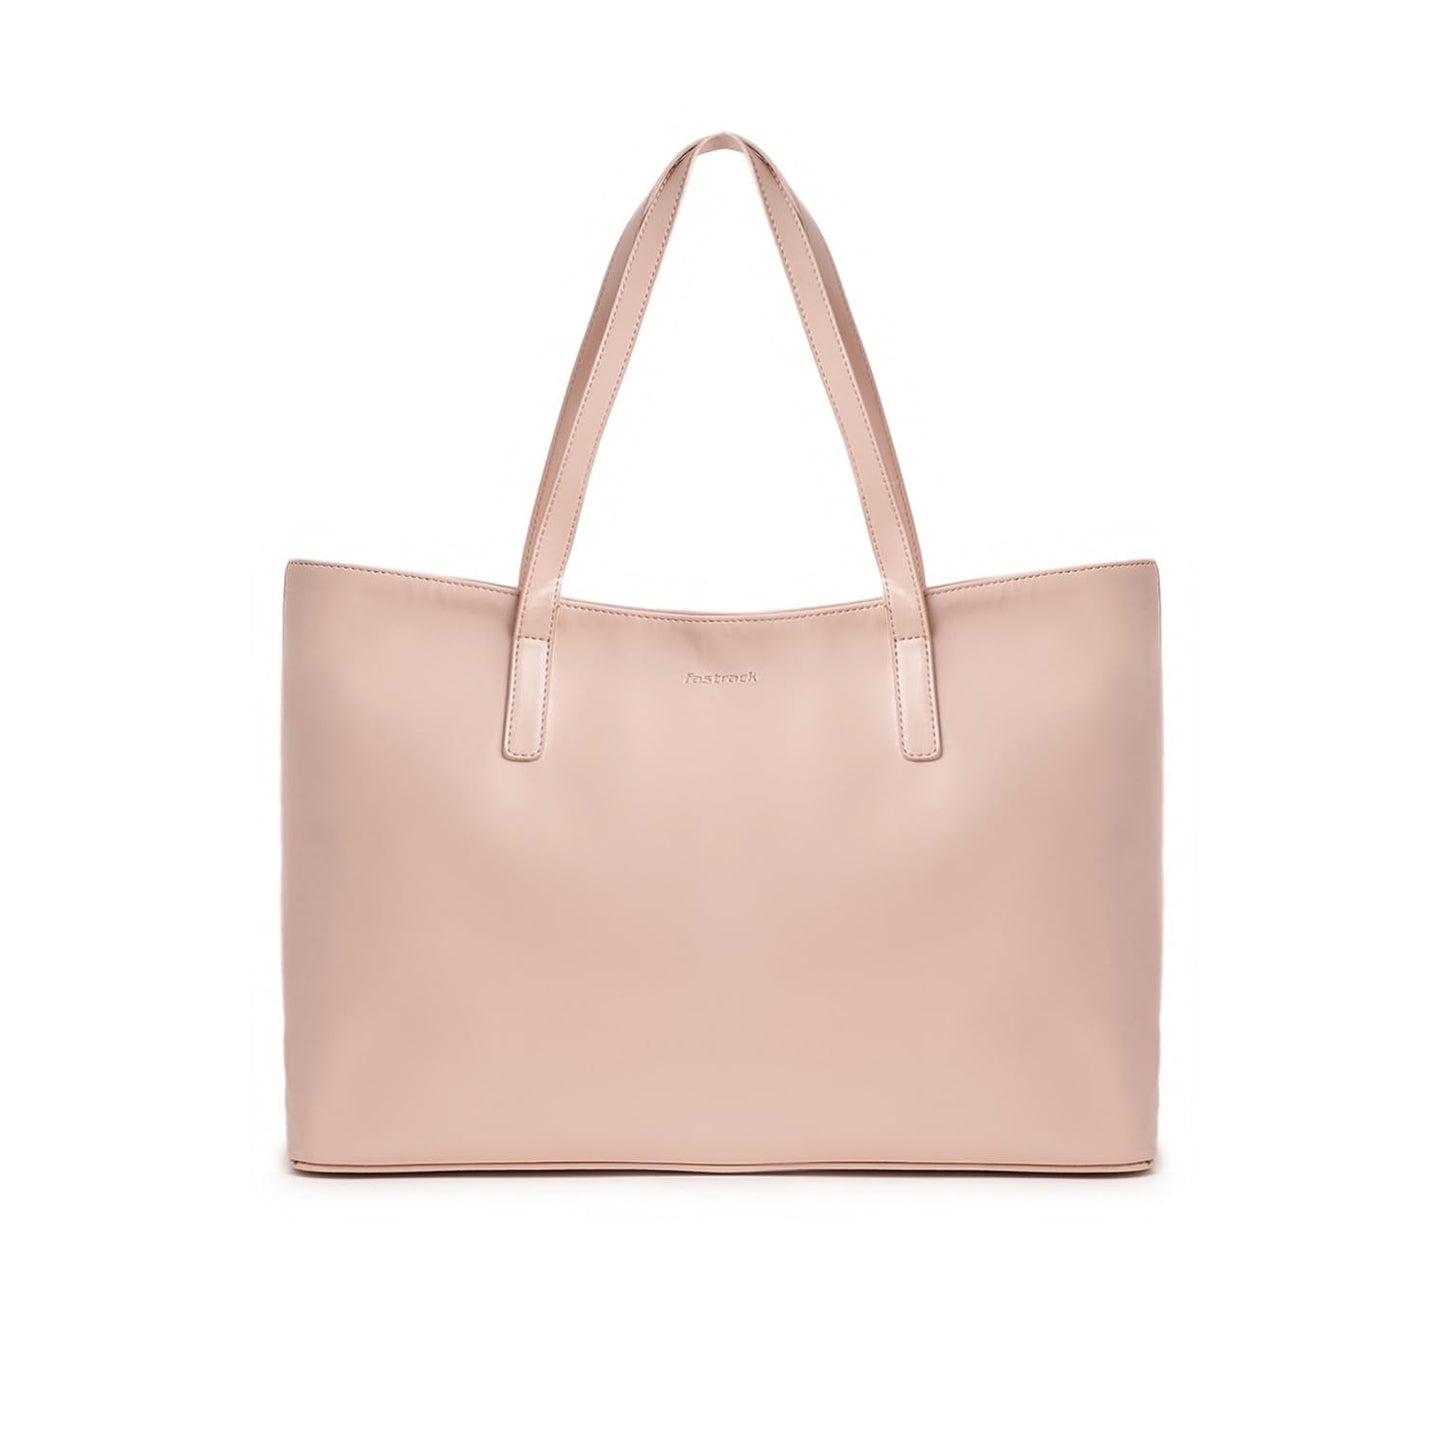 Fastrack Powder Pink College Tote Bag for Women 